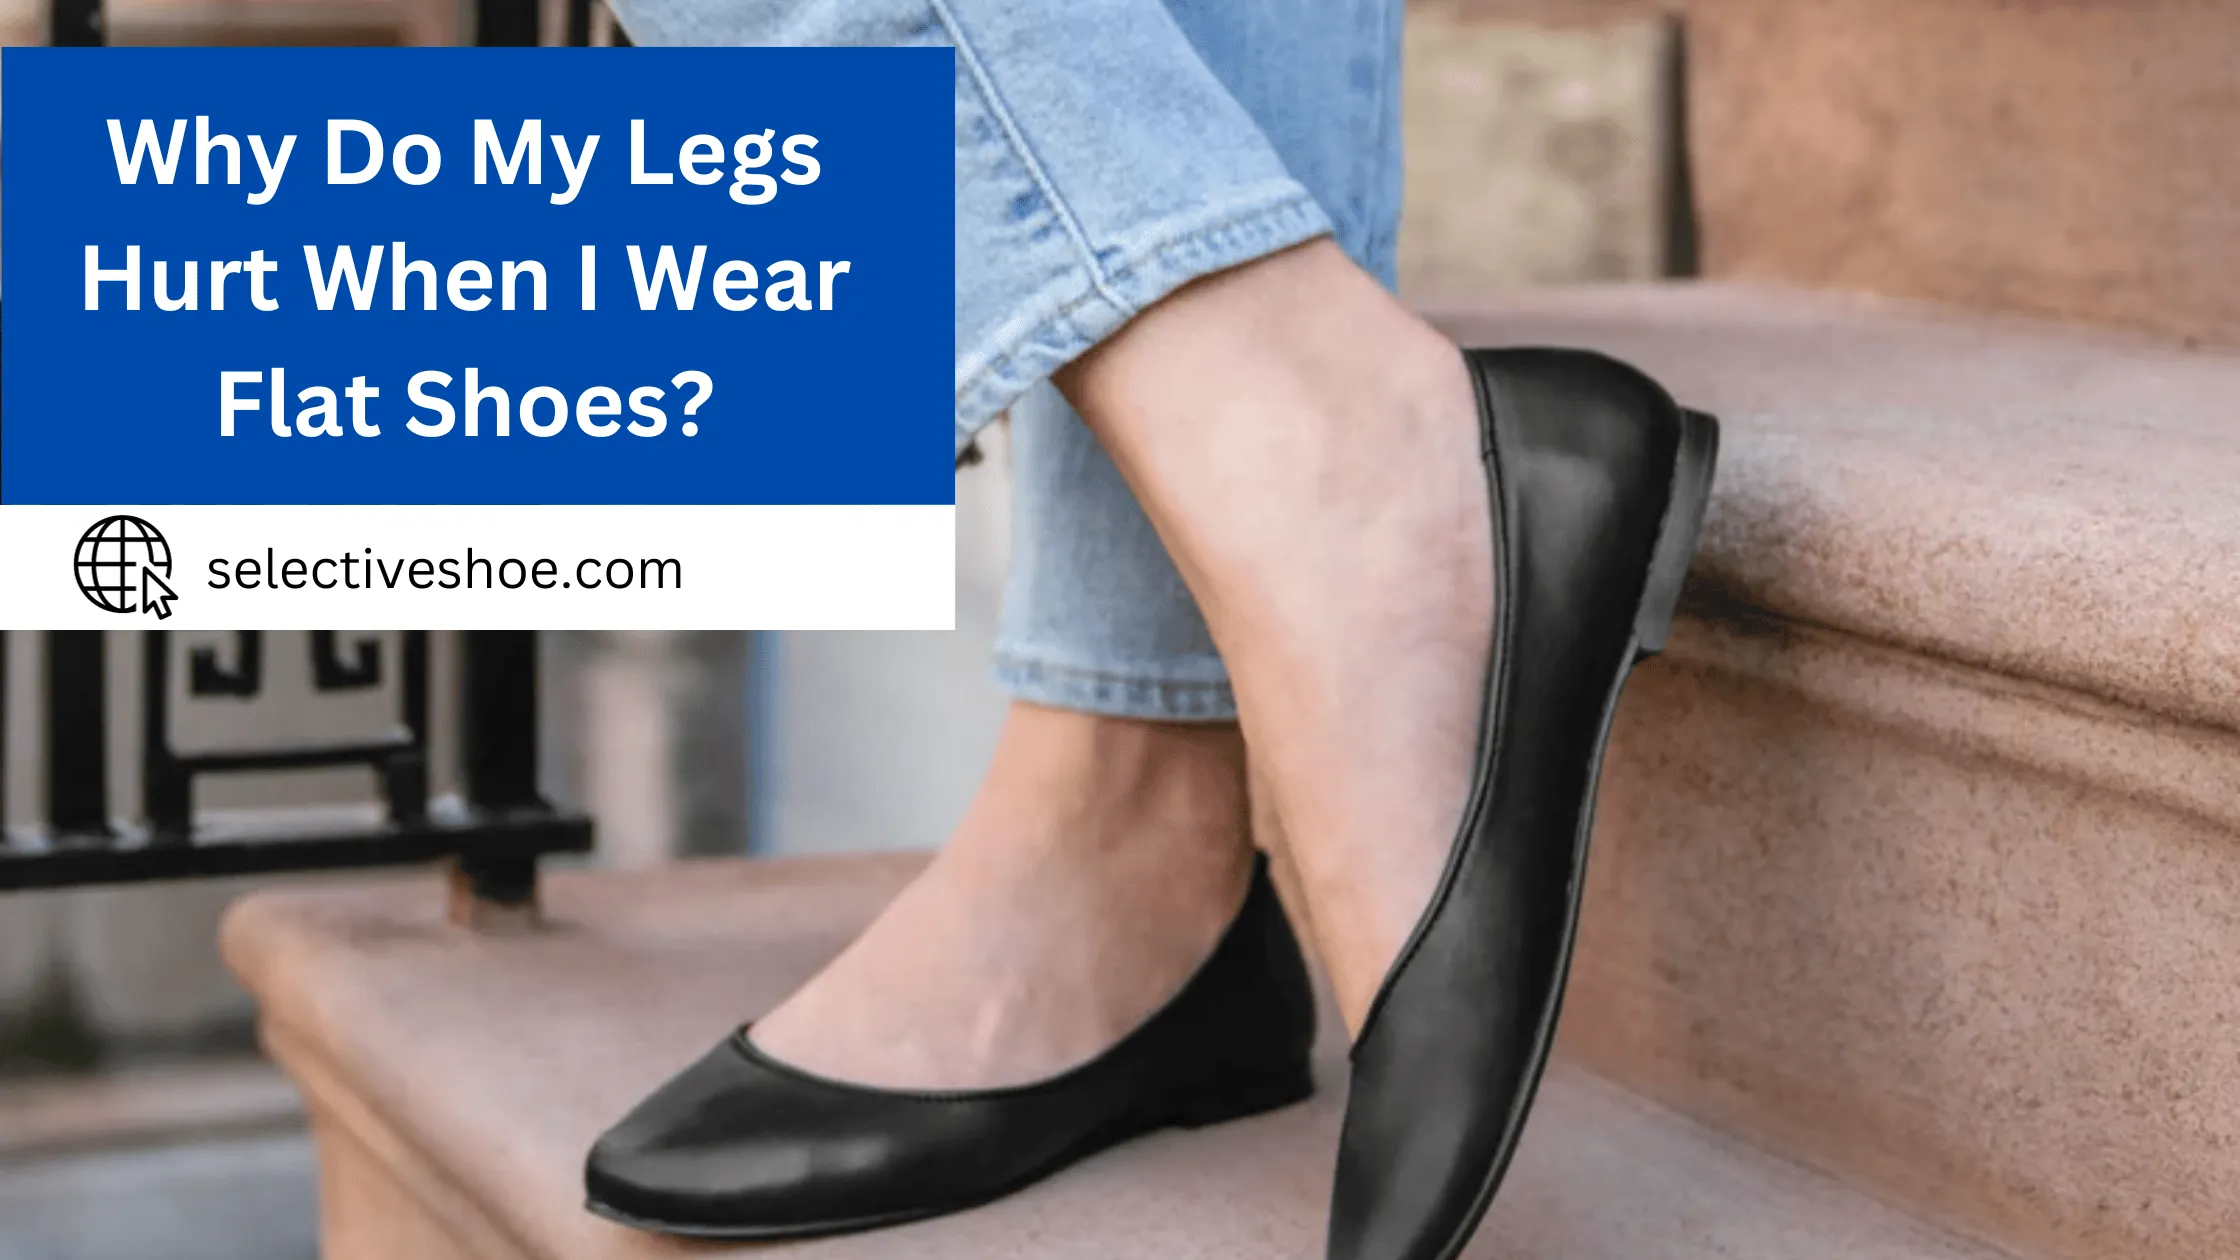 Why Do My Legs Hurt When I Wear Flat Shoes?